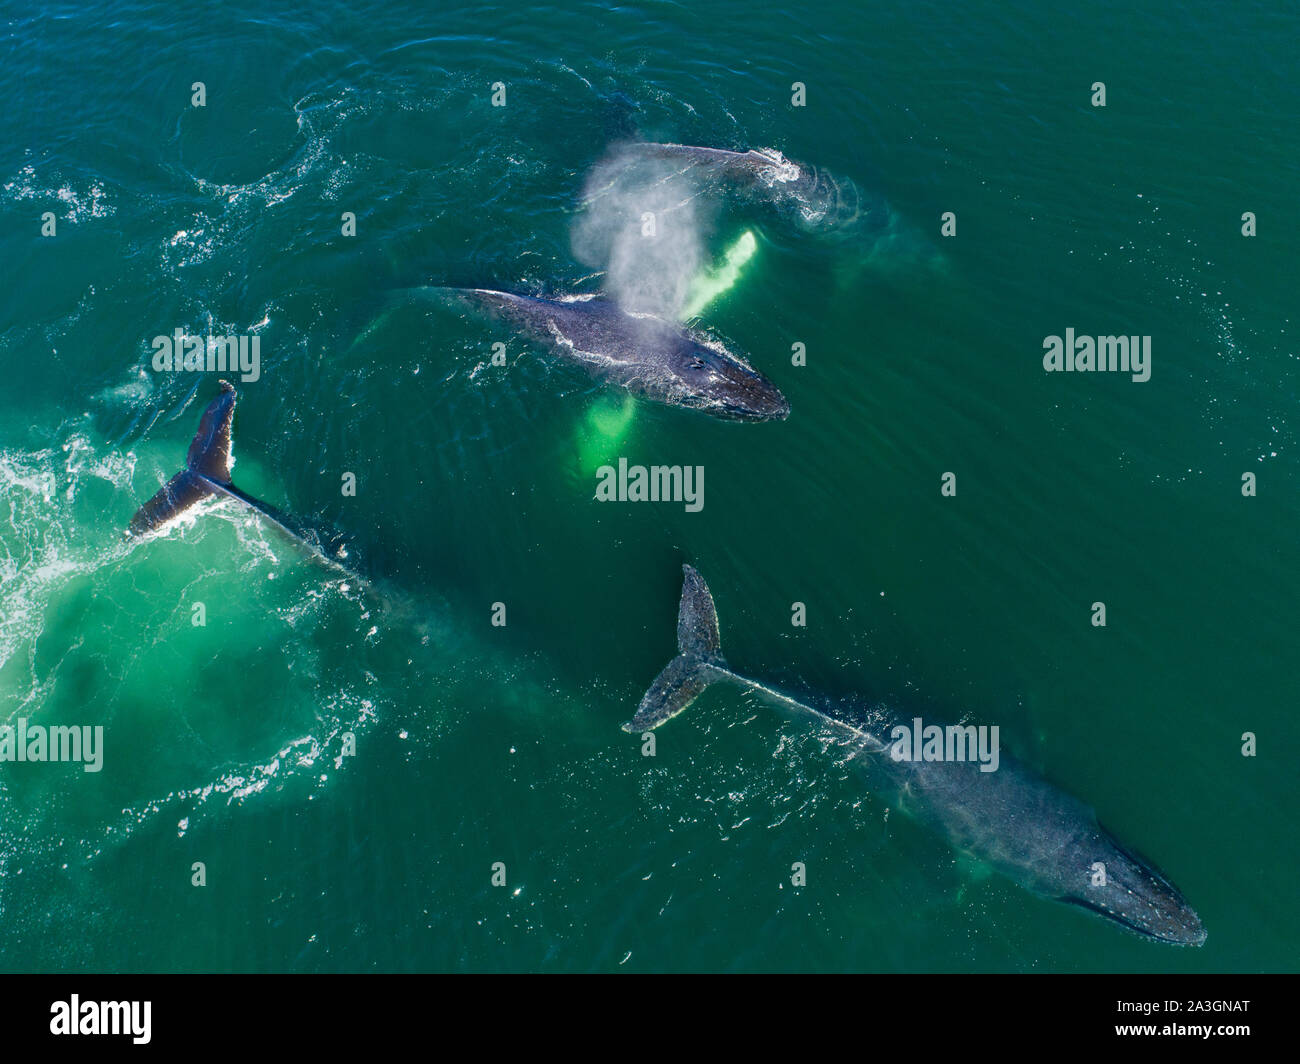 USA, Alaska, Aerial view of Humpback Whales (Megaptera novaeangliae) swimming together at surface of Frederick Sound while bubble net feeding on herri Stock Photo